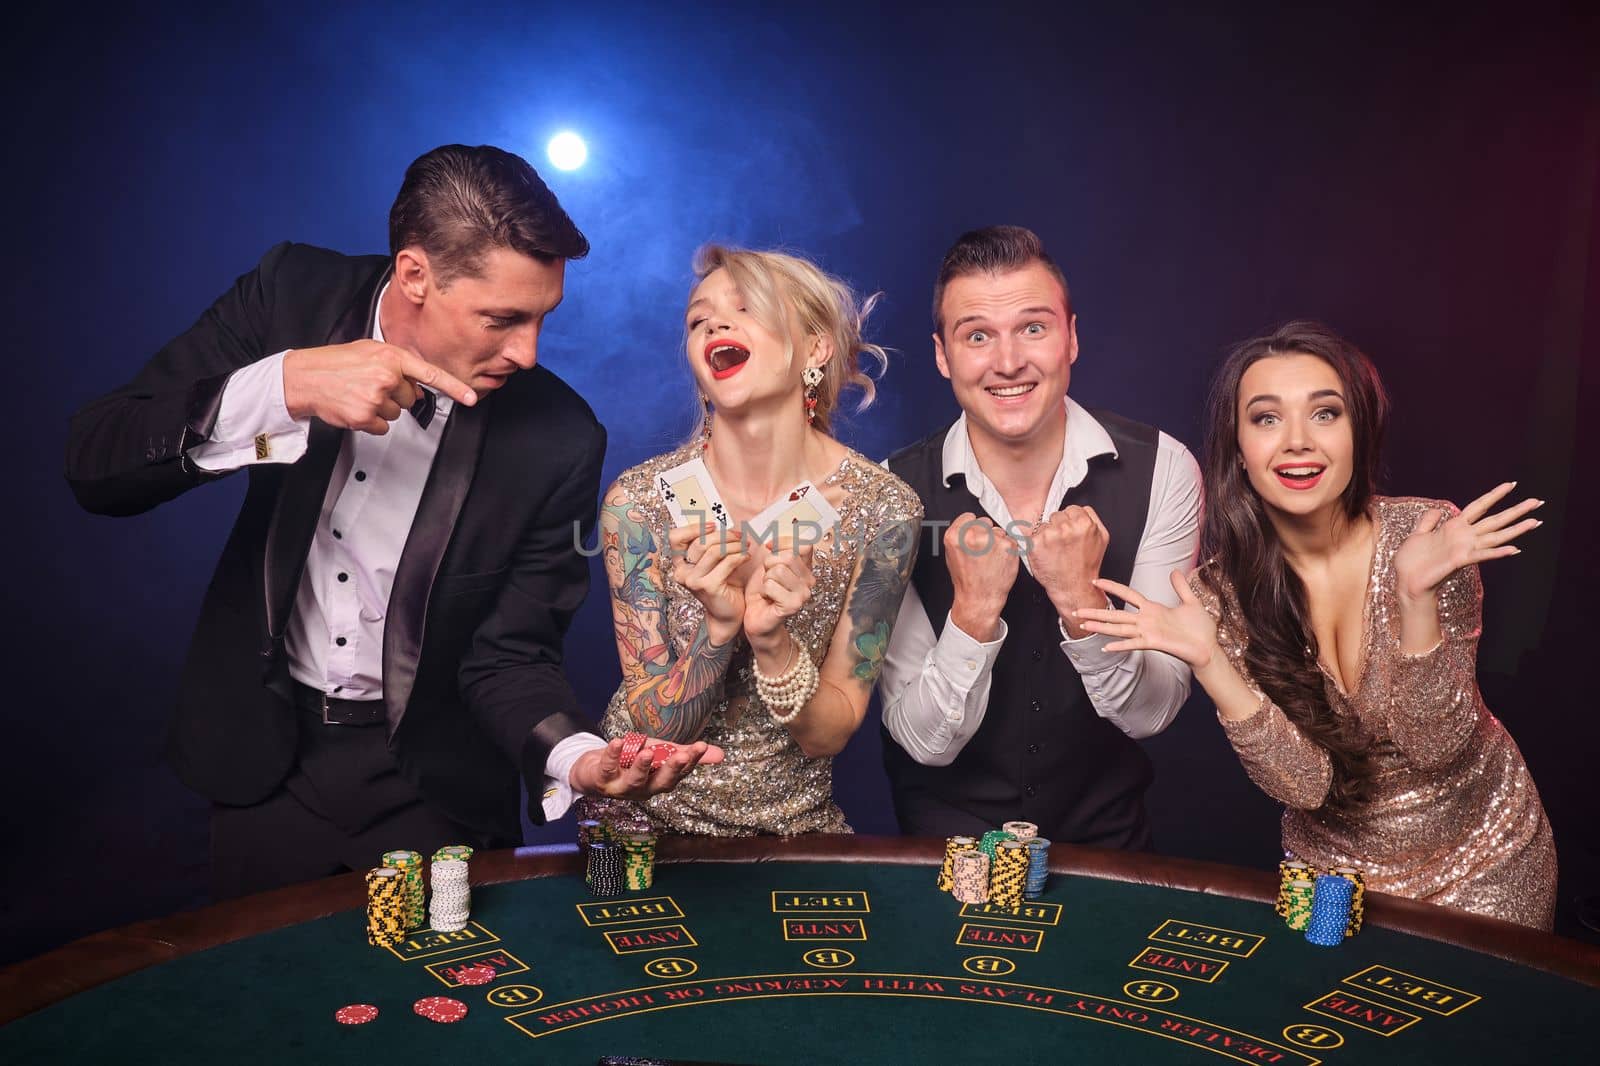 Group of a happy rich buddies are playing poker at casino. Youth are making bets waiting for a big win. They are looking happy standing at the table against a red and blue backlights on black background. Risky gambling entertainment.